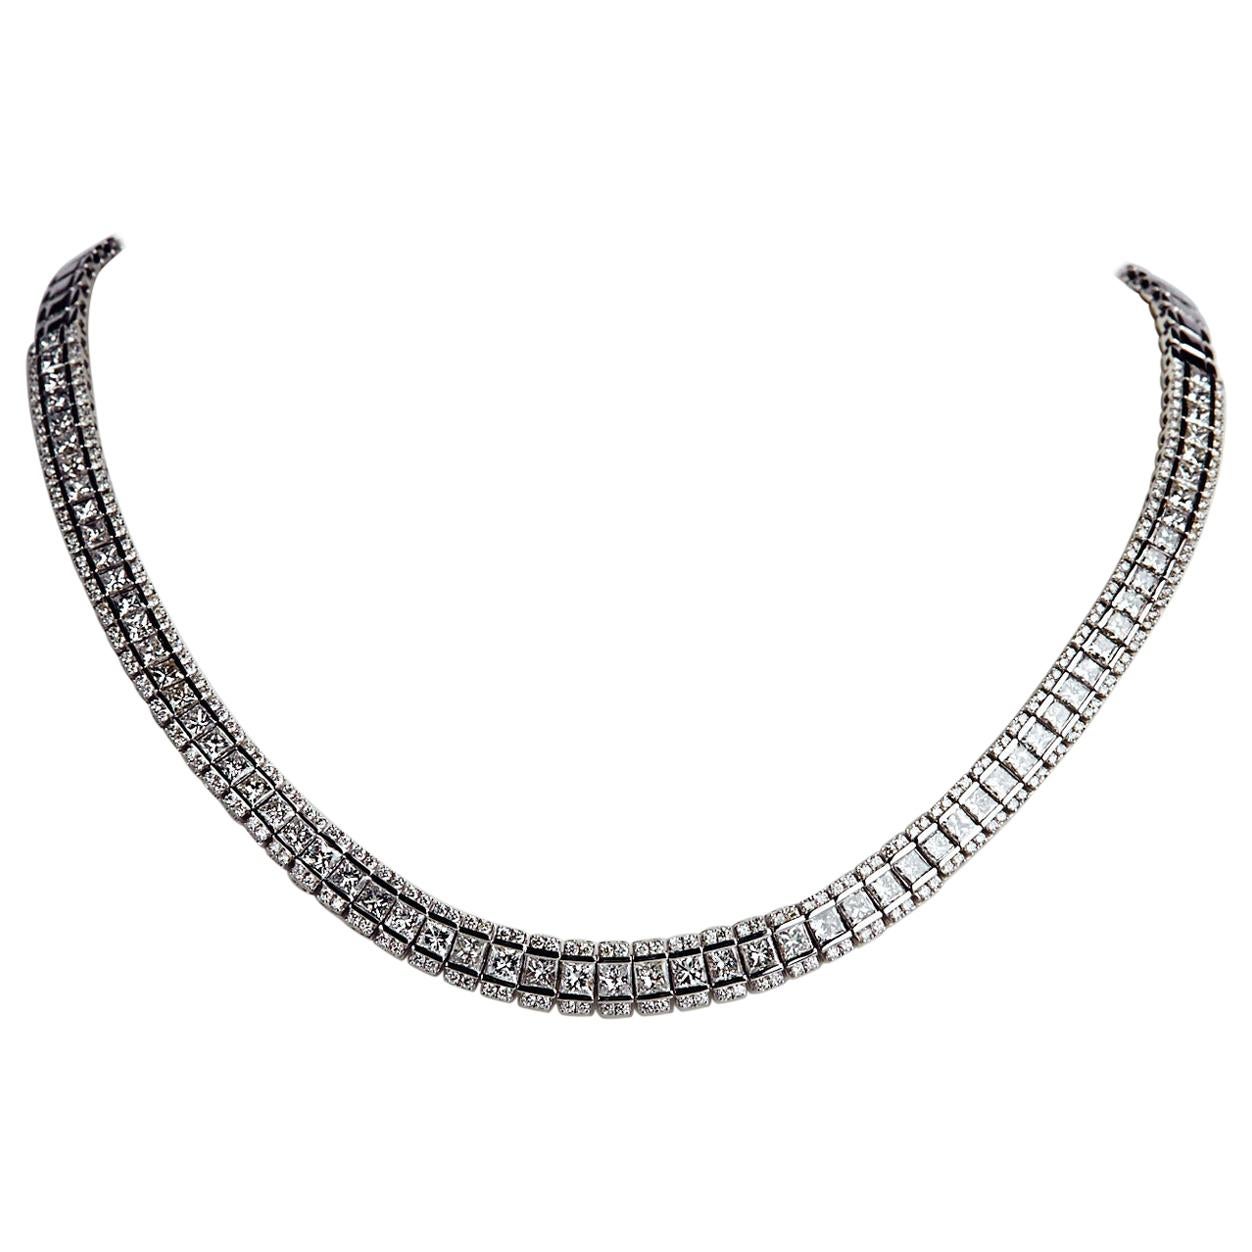 Diamond Necklace Set in 18 Karat White Gold Weighing 55.08 gms and 14.67 Carat For Sale